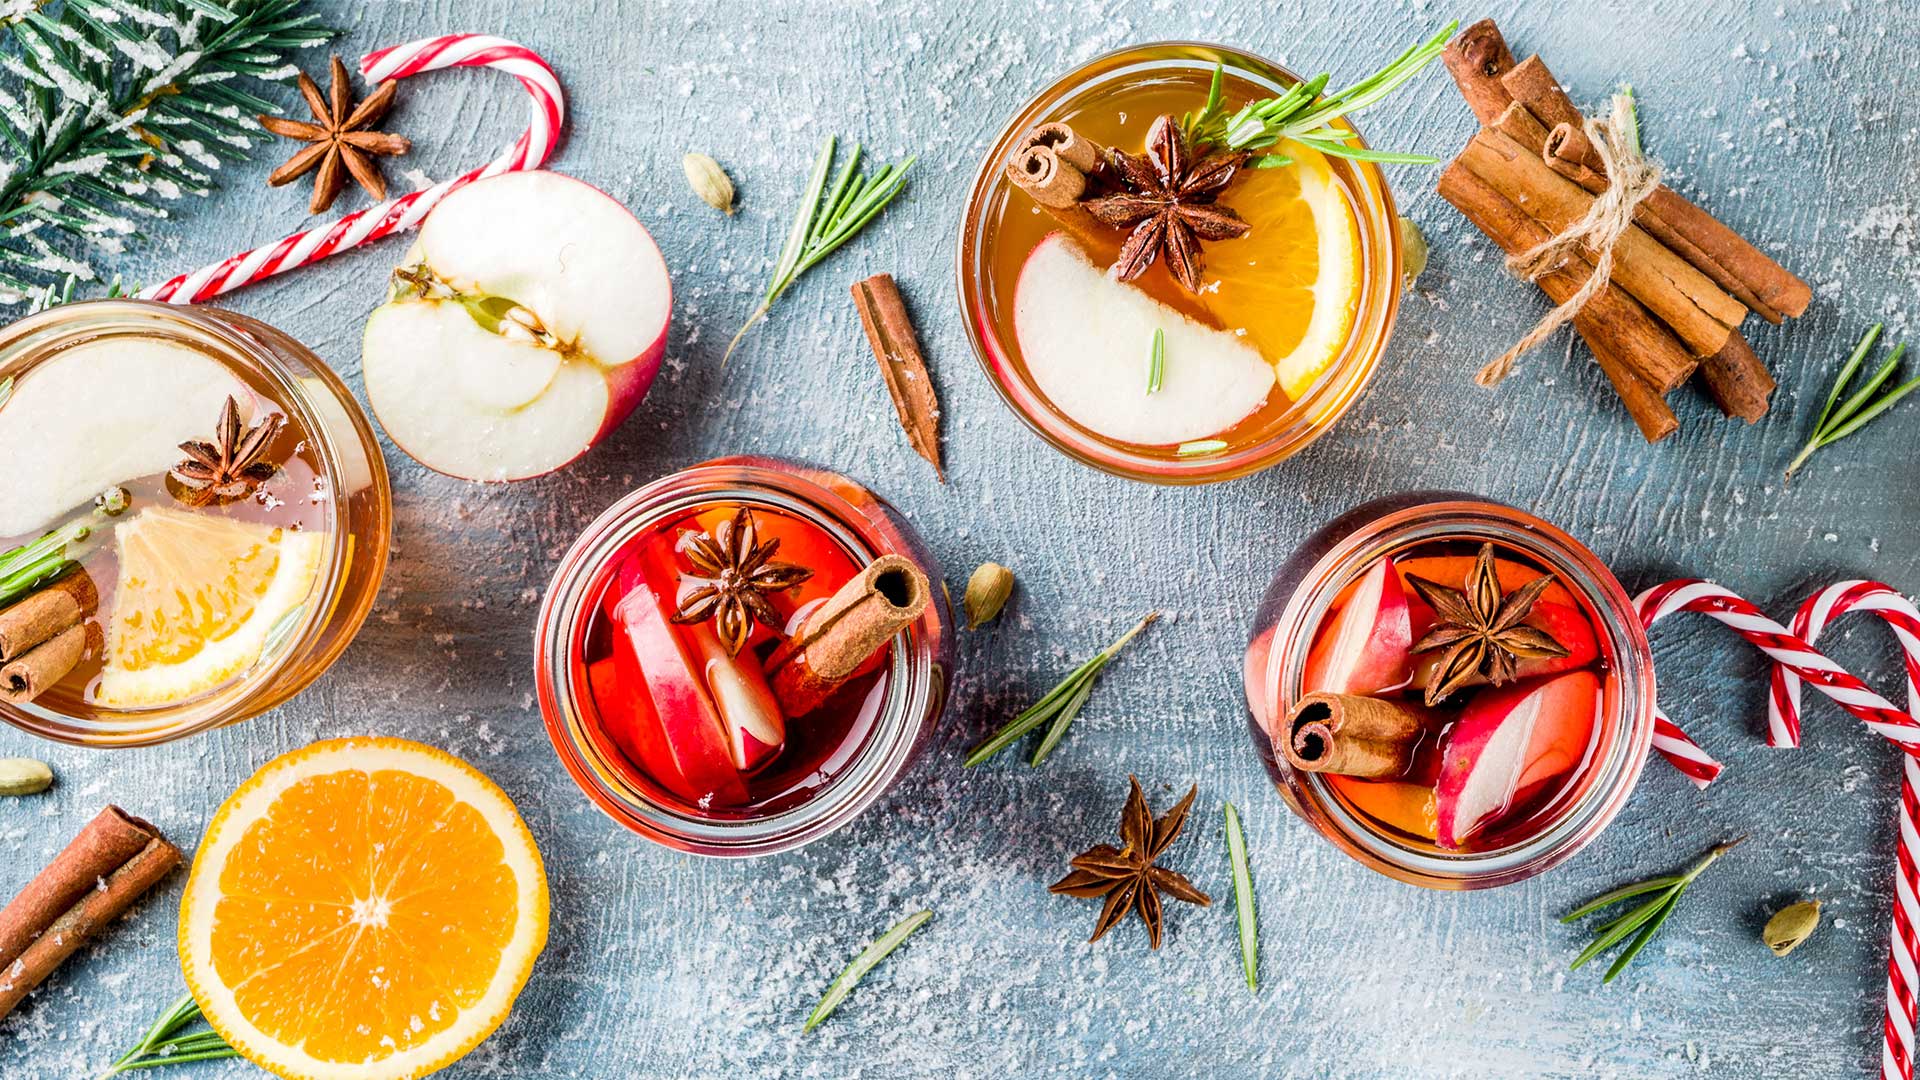 Special holiday-themed cocktails with candy canes and fruit